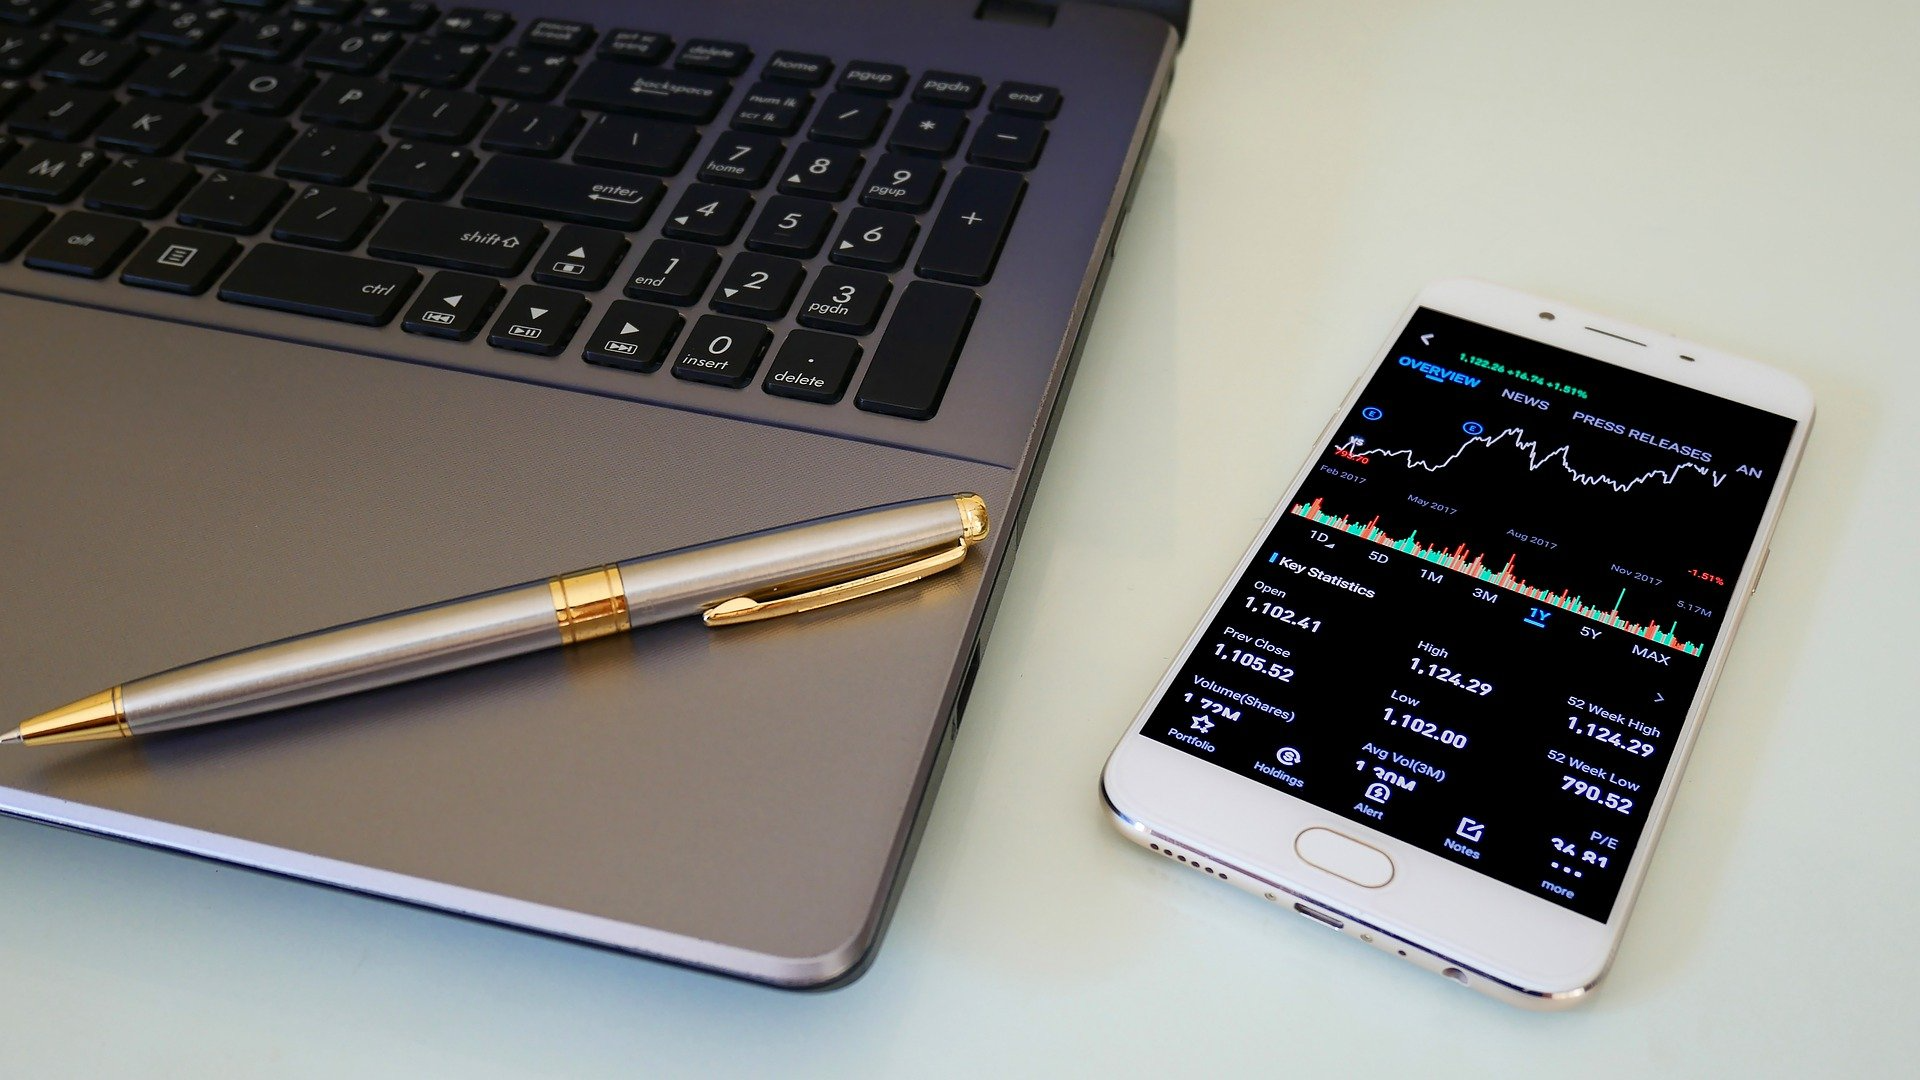 A close-up photo of a pen, laptop, and mobile device on a tabletop.